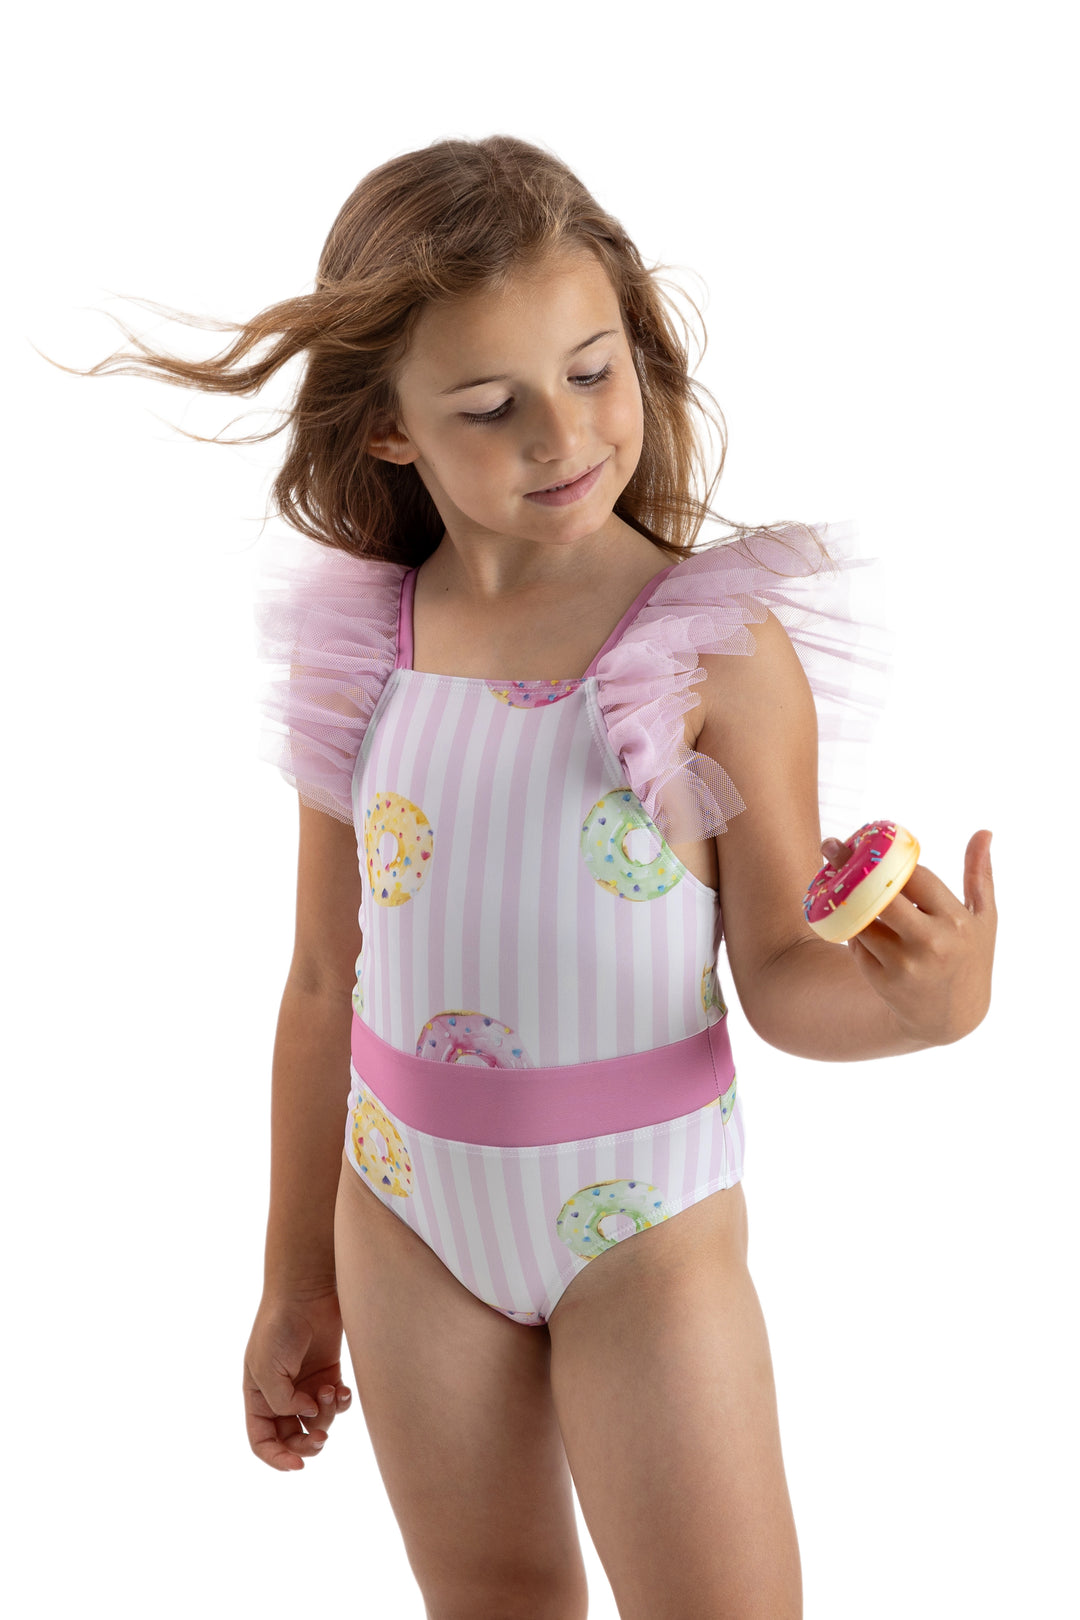 Meia Pata PREORDER DONUTS "Pasion" Swimsuit | Millie and John